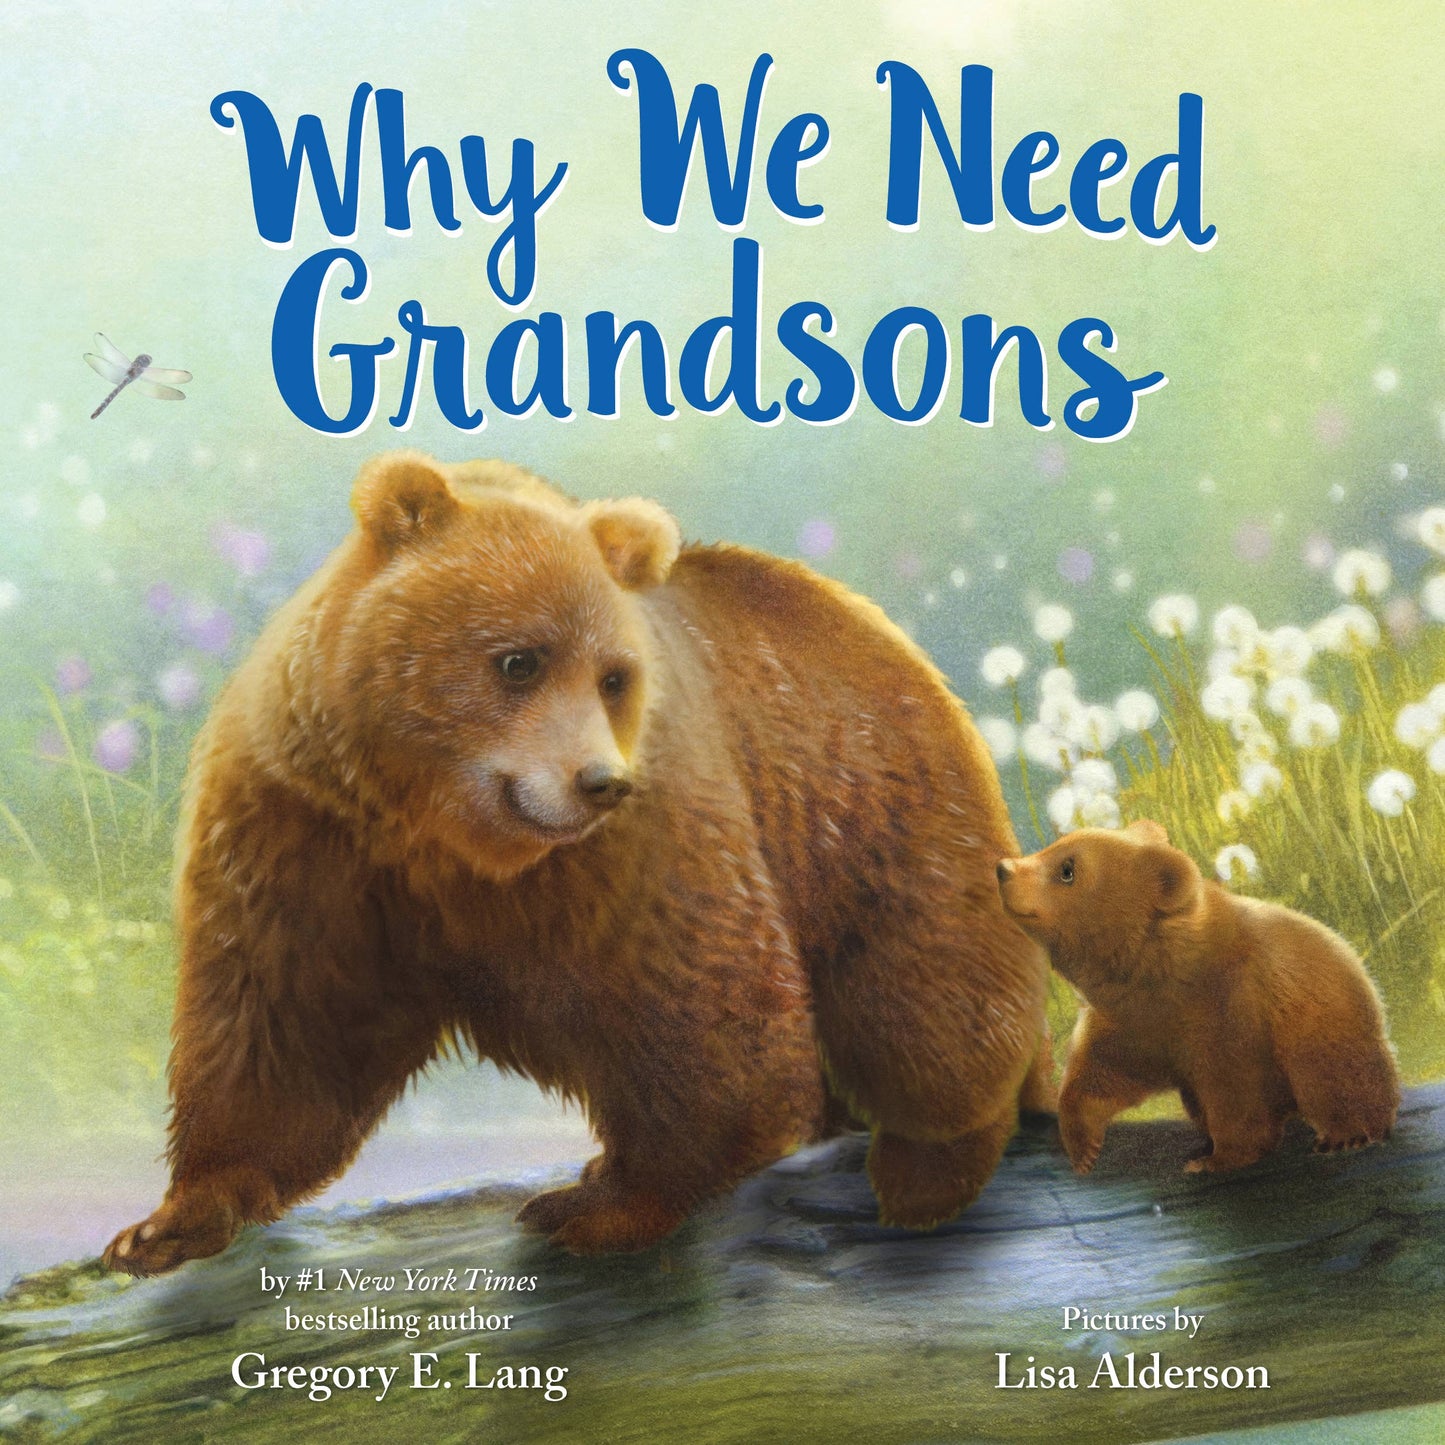 Why We Need Grandsons (HC)